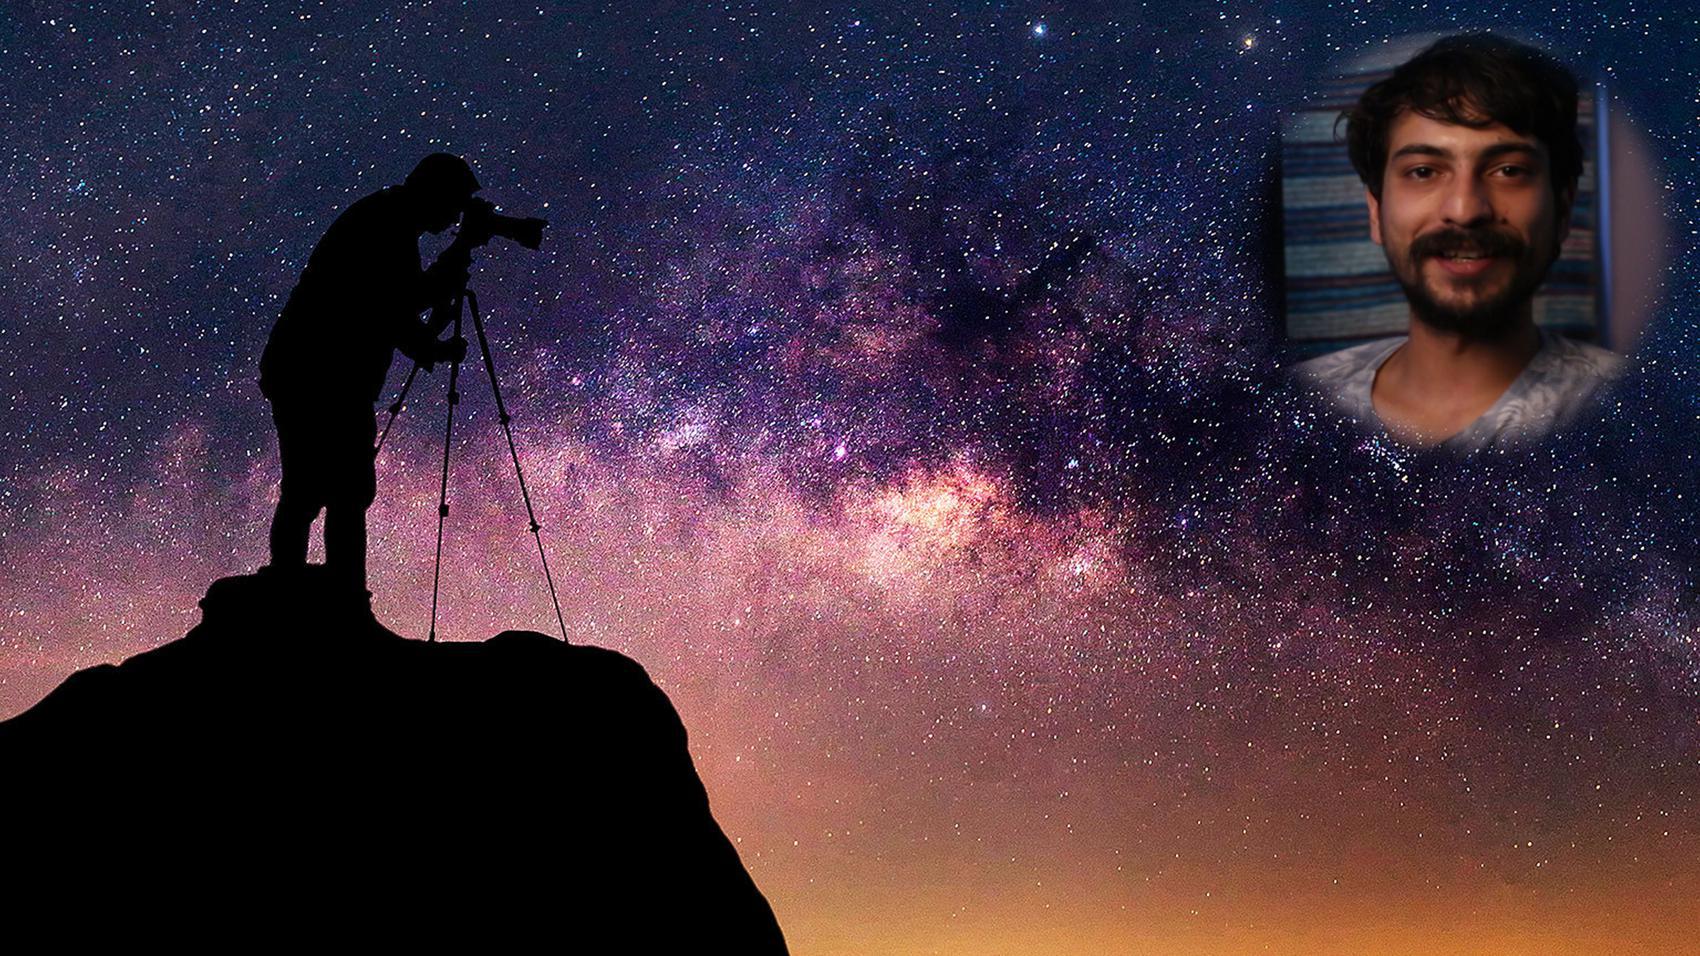 Career in Astrophotography